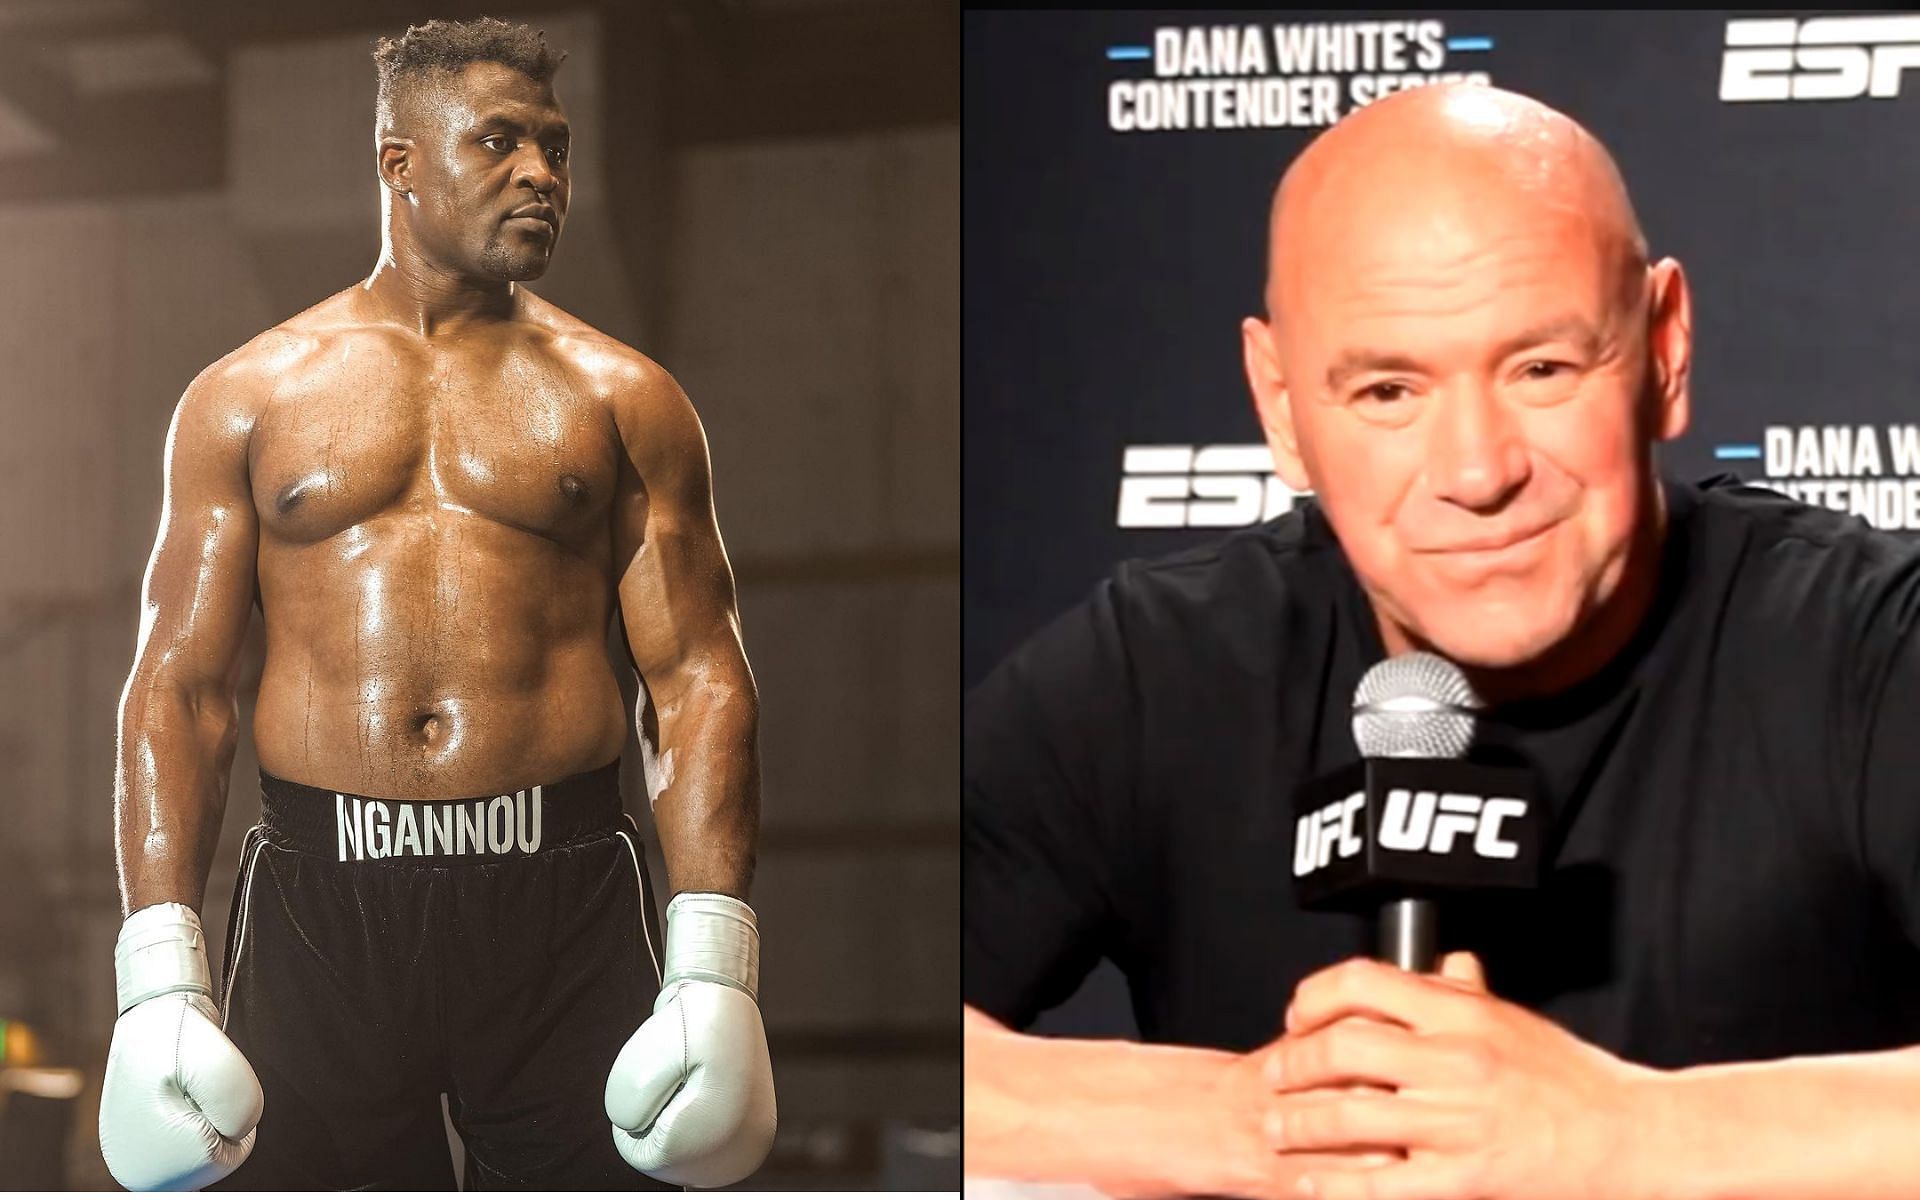 Francis Ngannou (left) and Dana White (right) (Image credits @francisngannou and @ufc on Instagram)